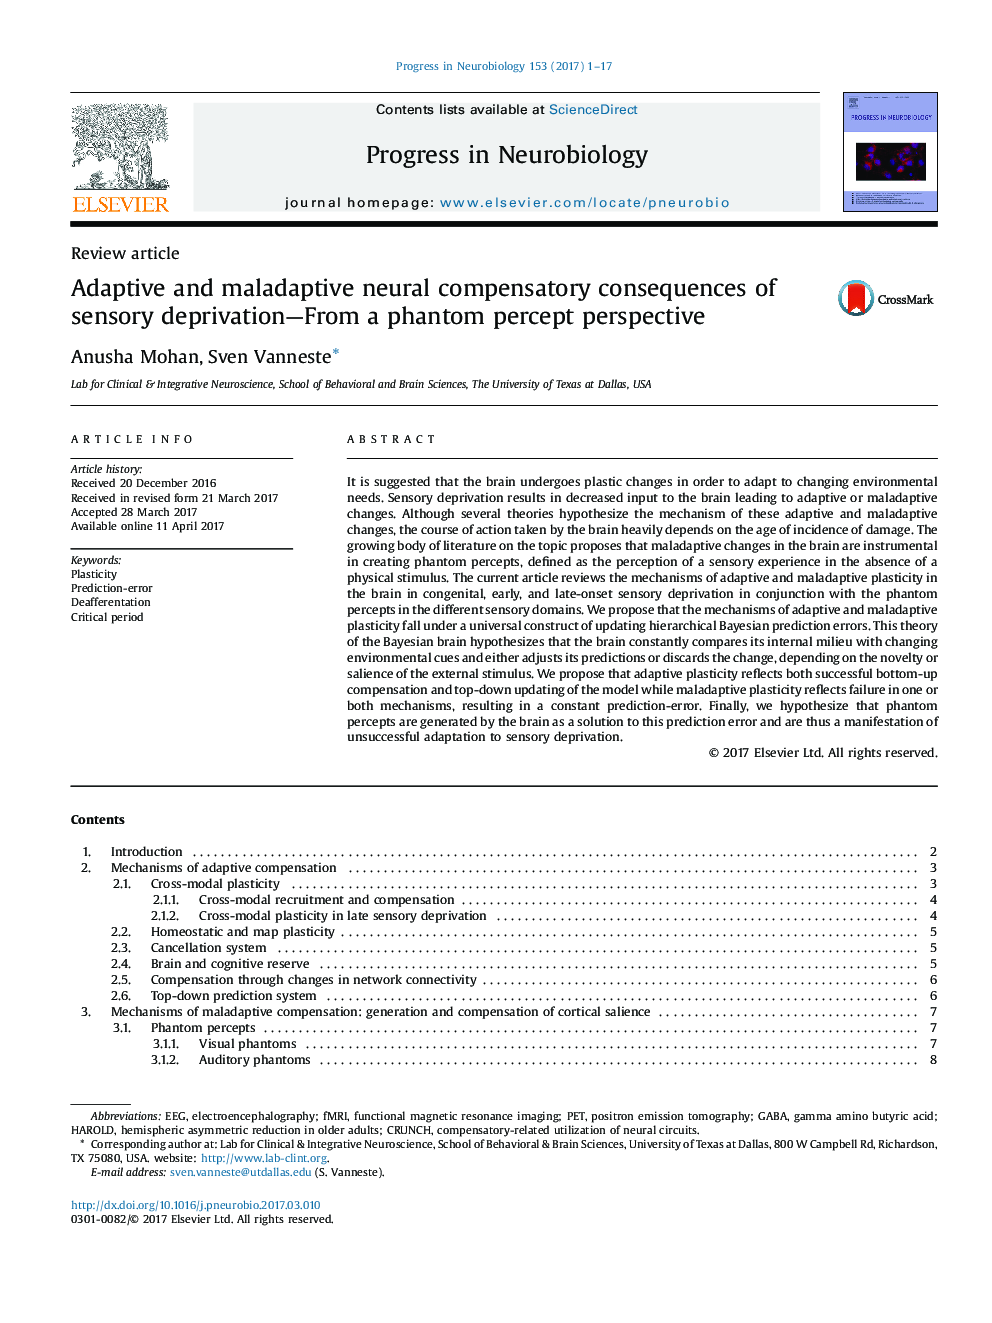 Review articleAdaptive and maladaptive neural compensatory consequences of sensory deprivation-From a phantom percept perspective